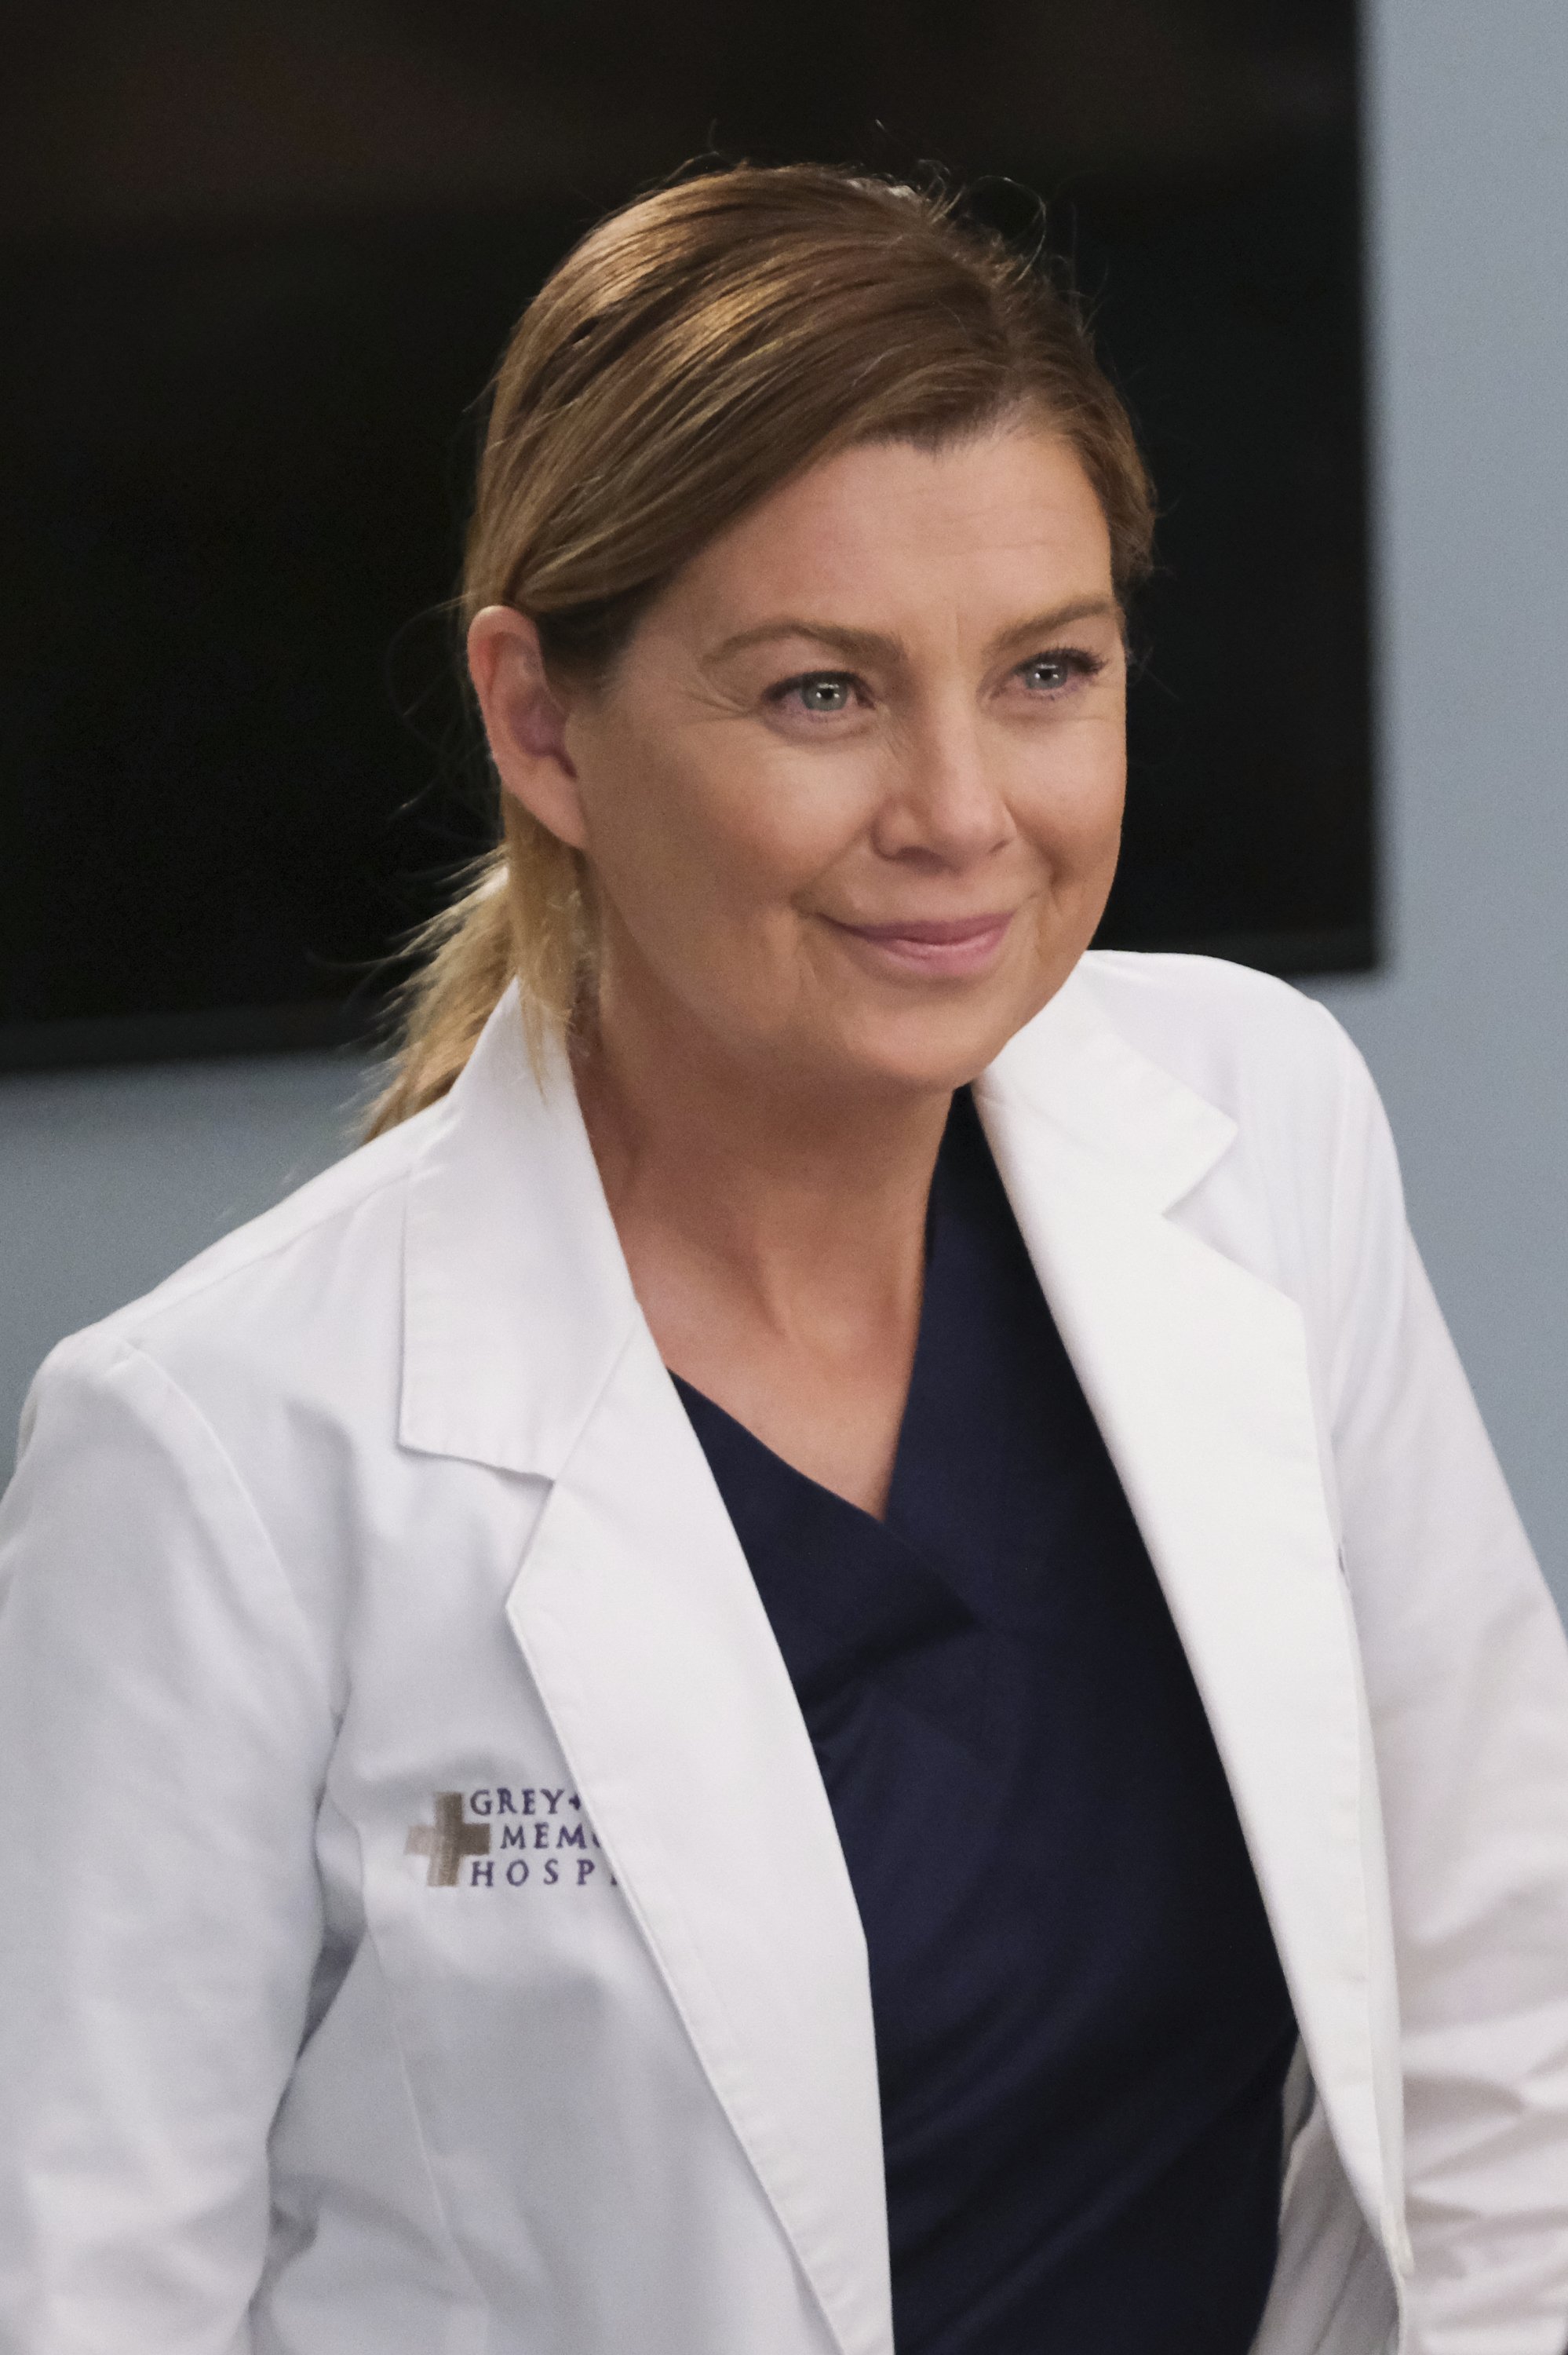 Ellen Pompeo on "Grey's Anatomy" on March 3, 2020 | Source: Getty Images 